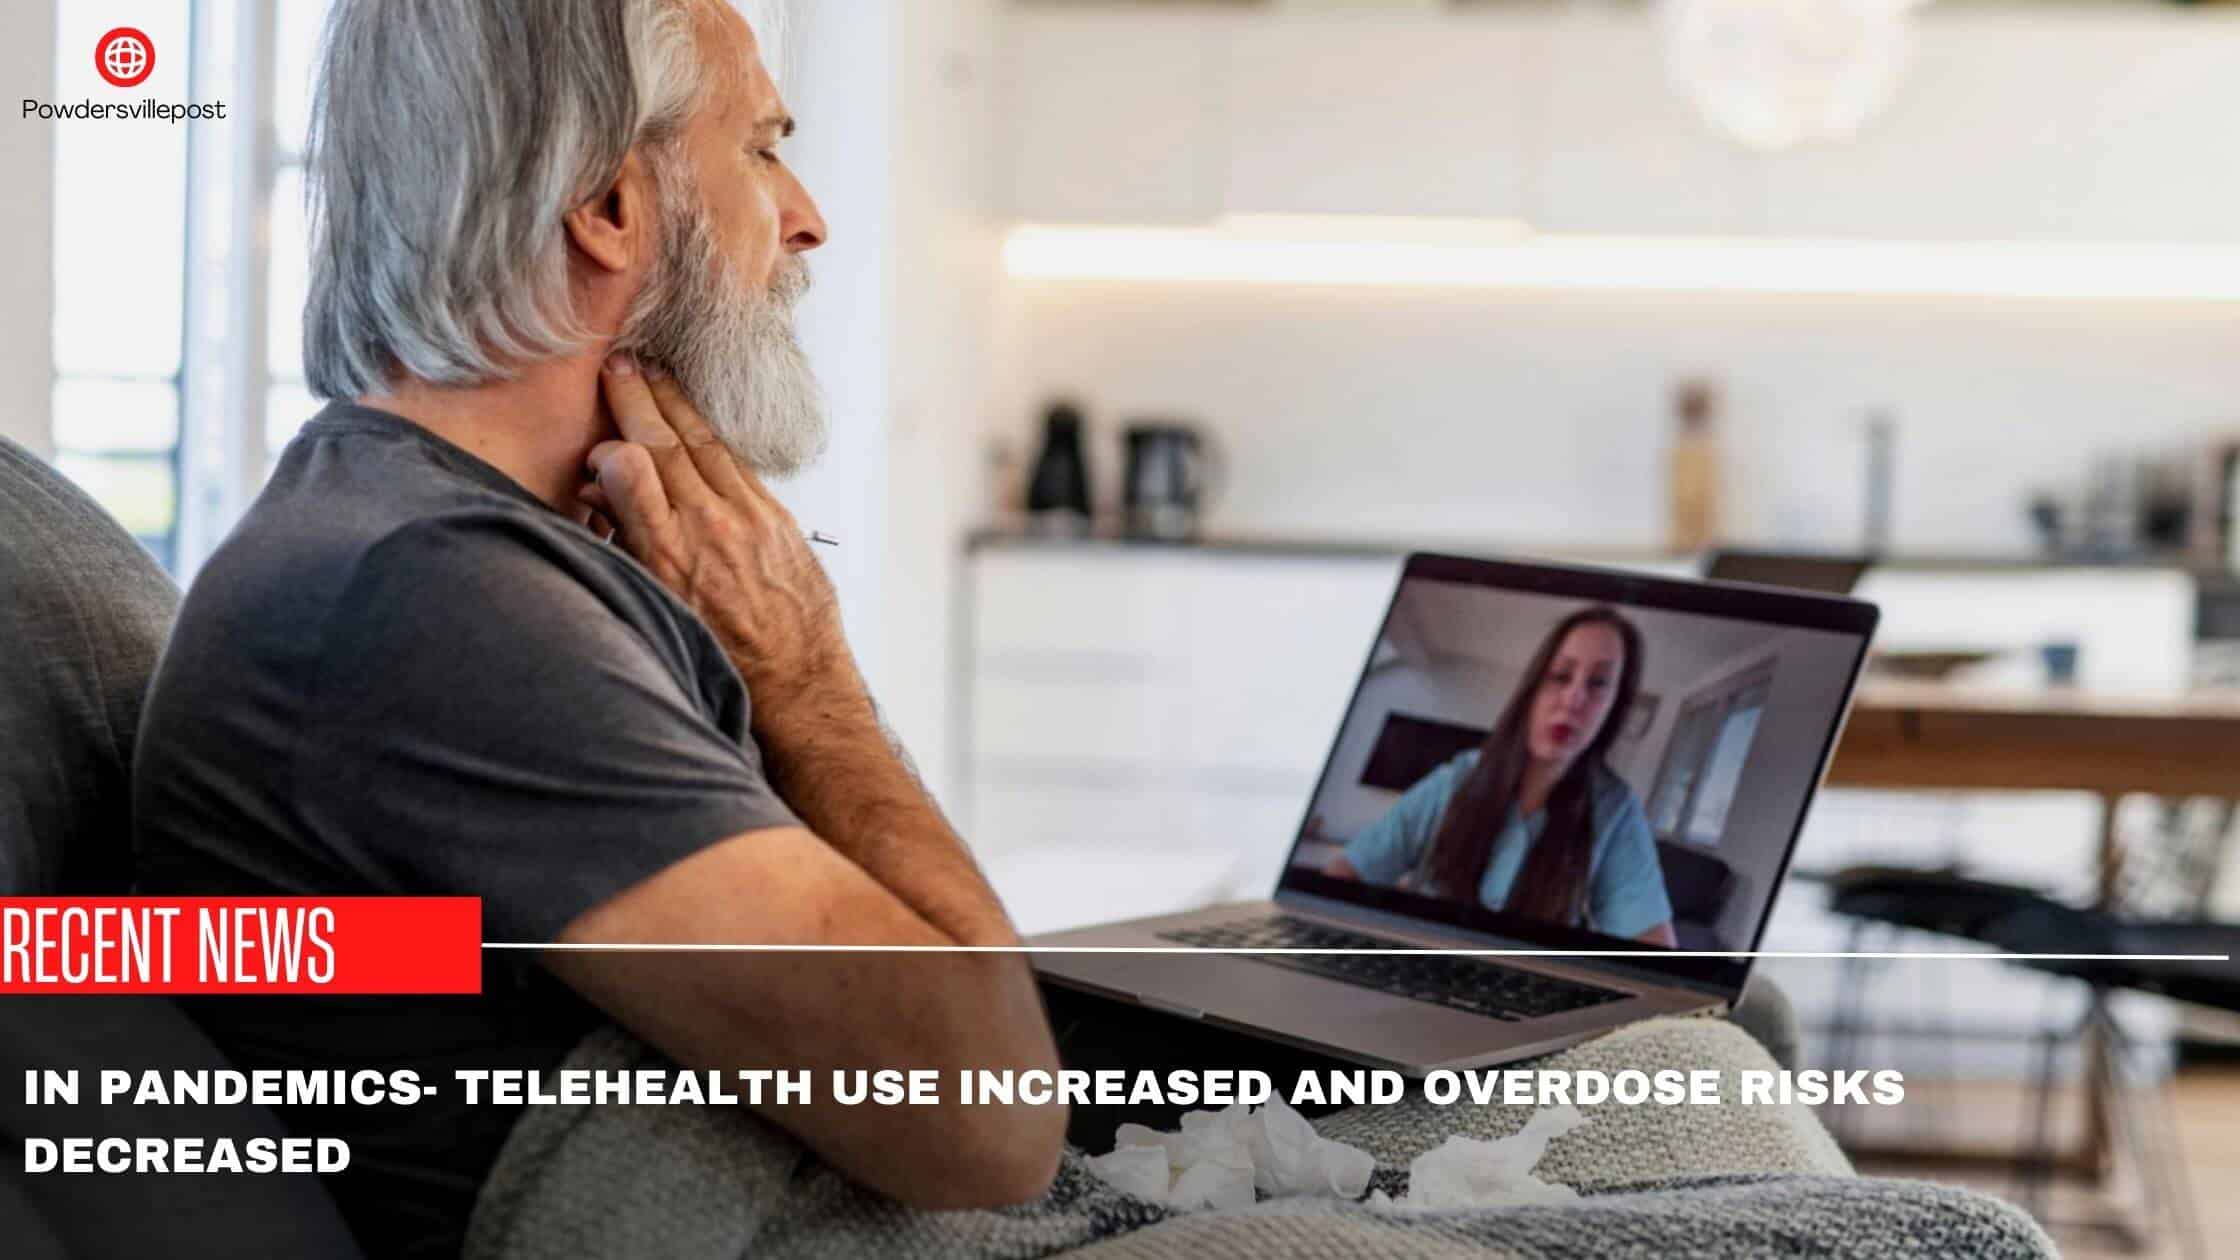 In Pandemics- Telehealth Use Increased And Overdose Risks Decreased